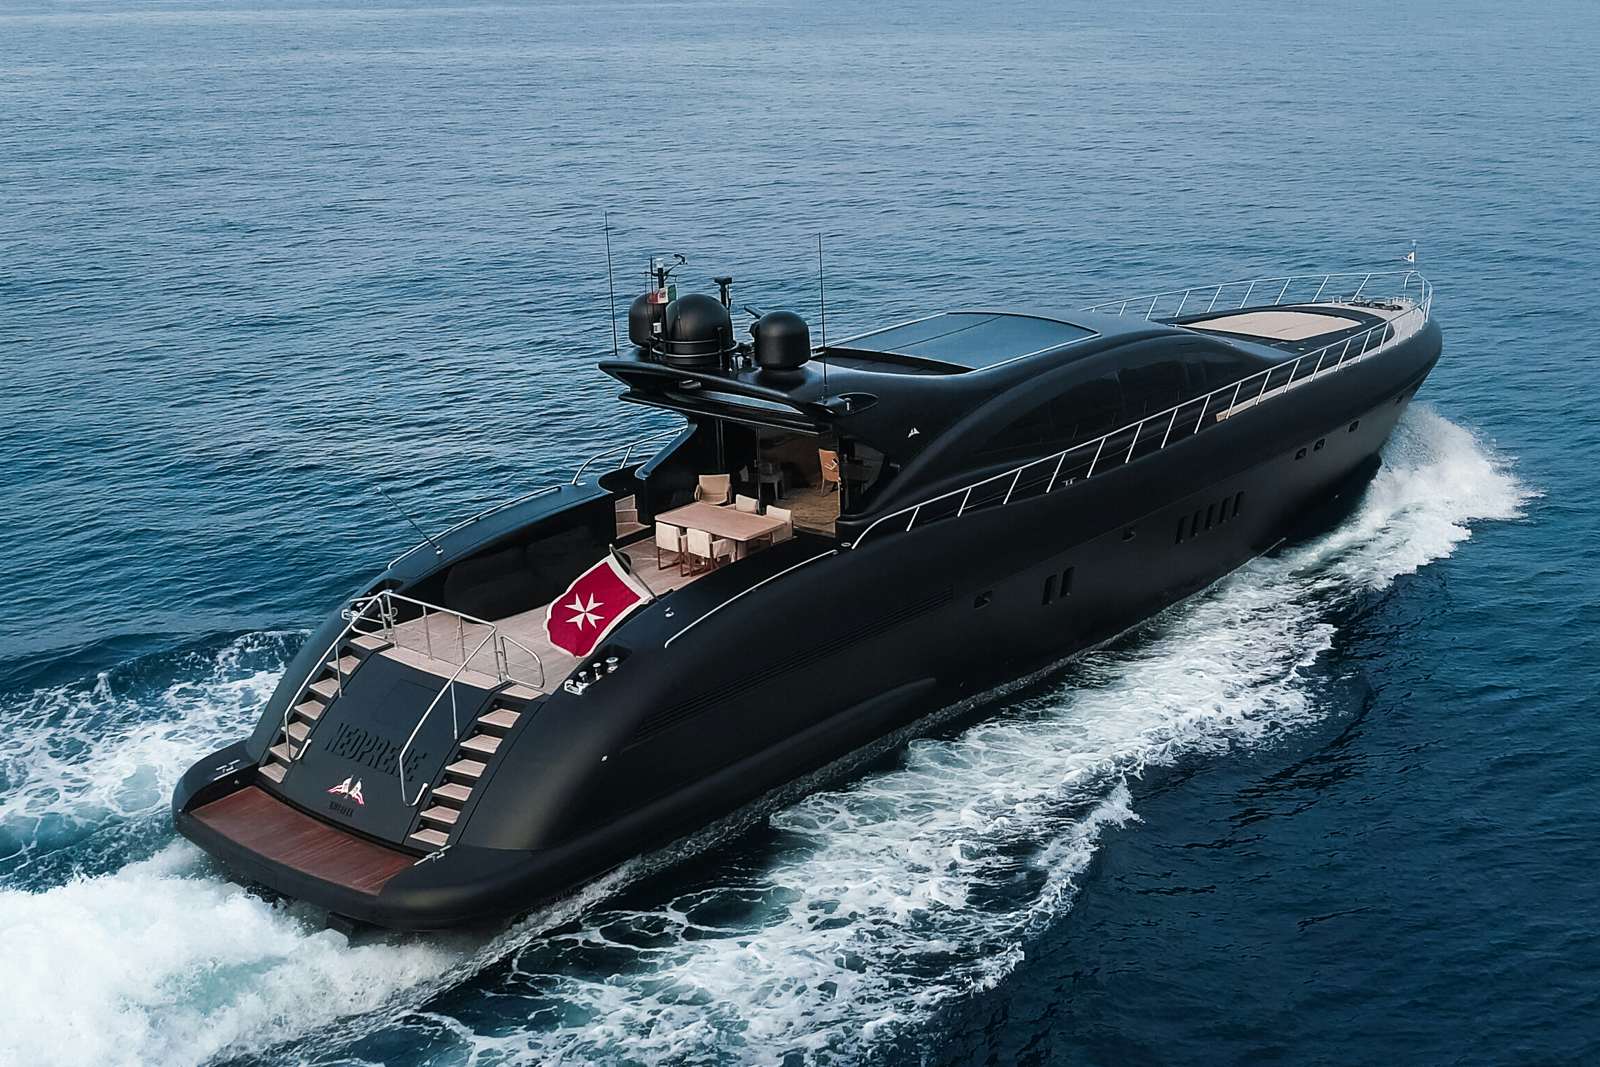 A sleek black Mangusta 108 yacht cruising on the ocean, its deck featuring an outdoor lounge and dining area.